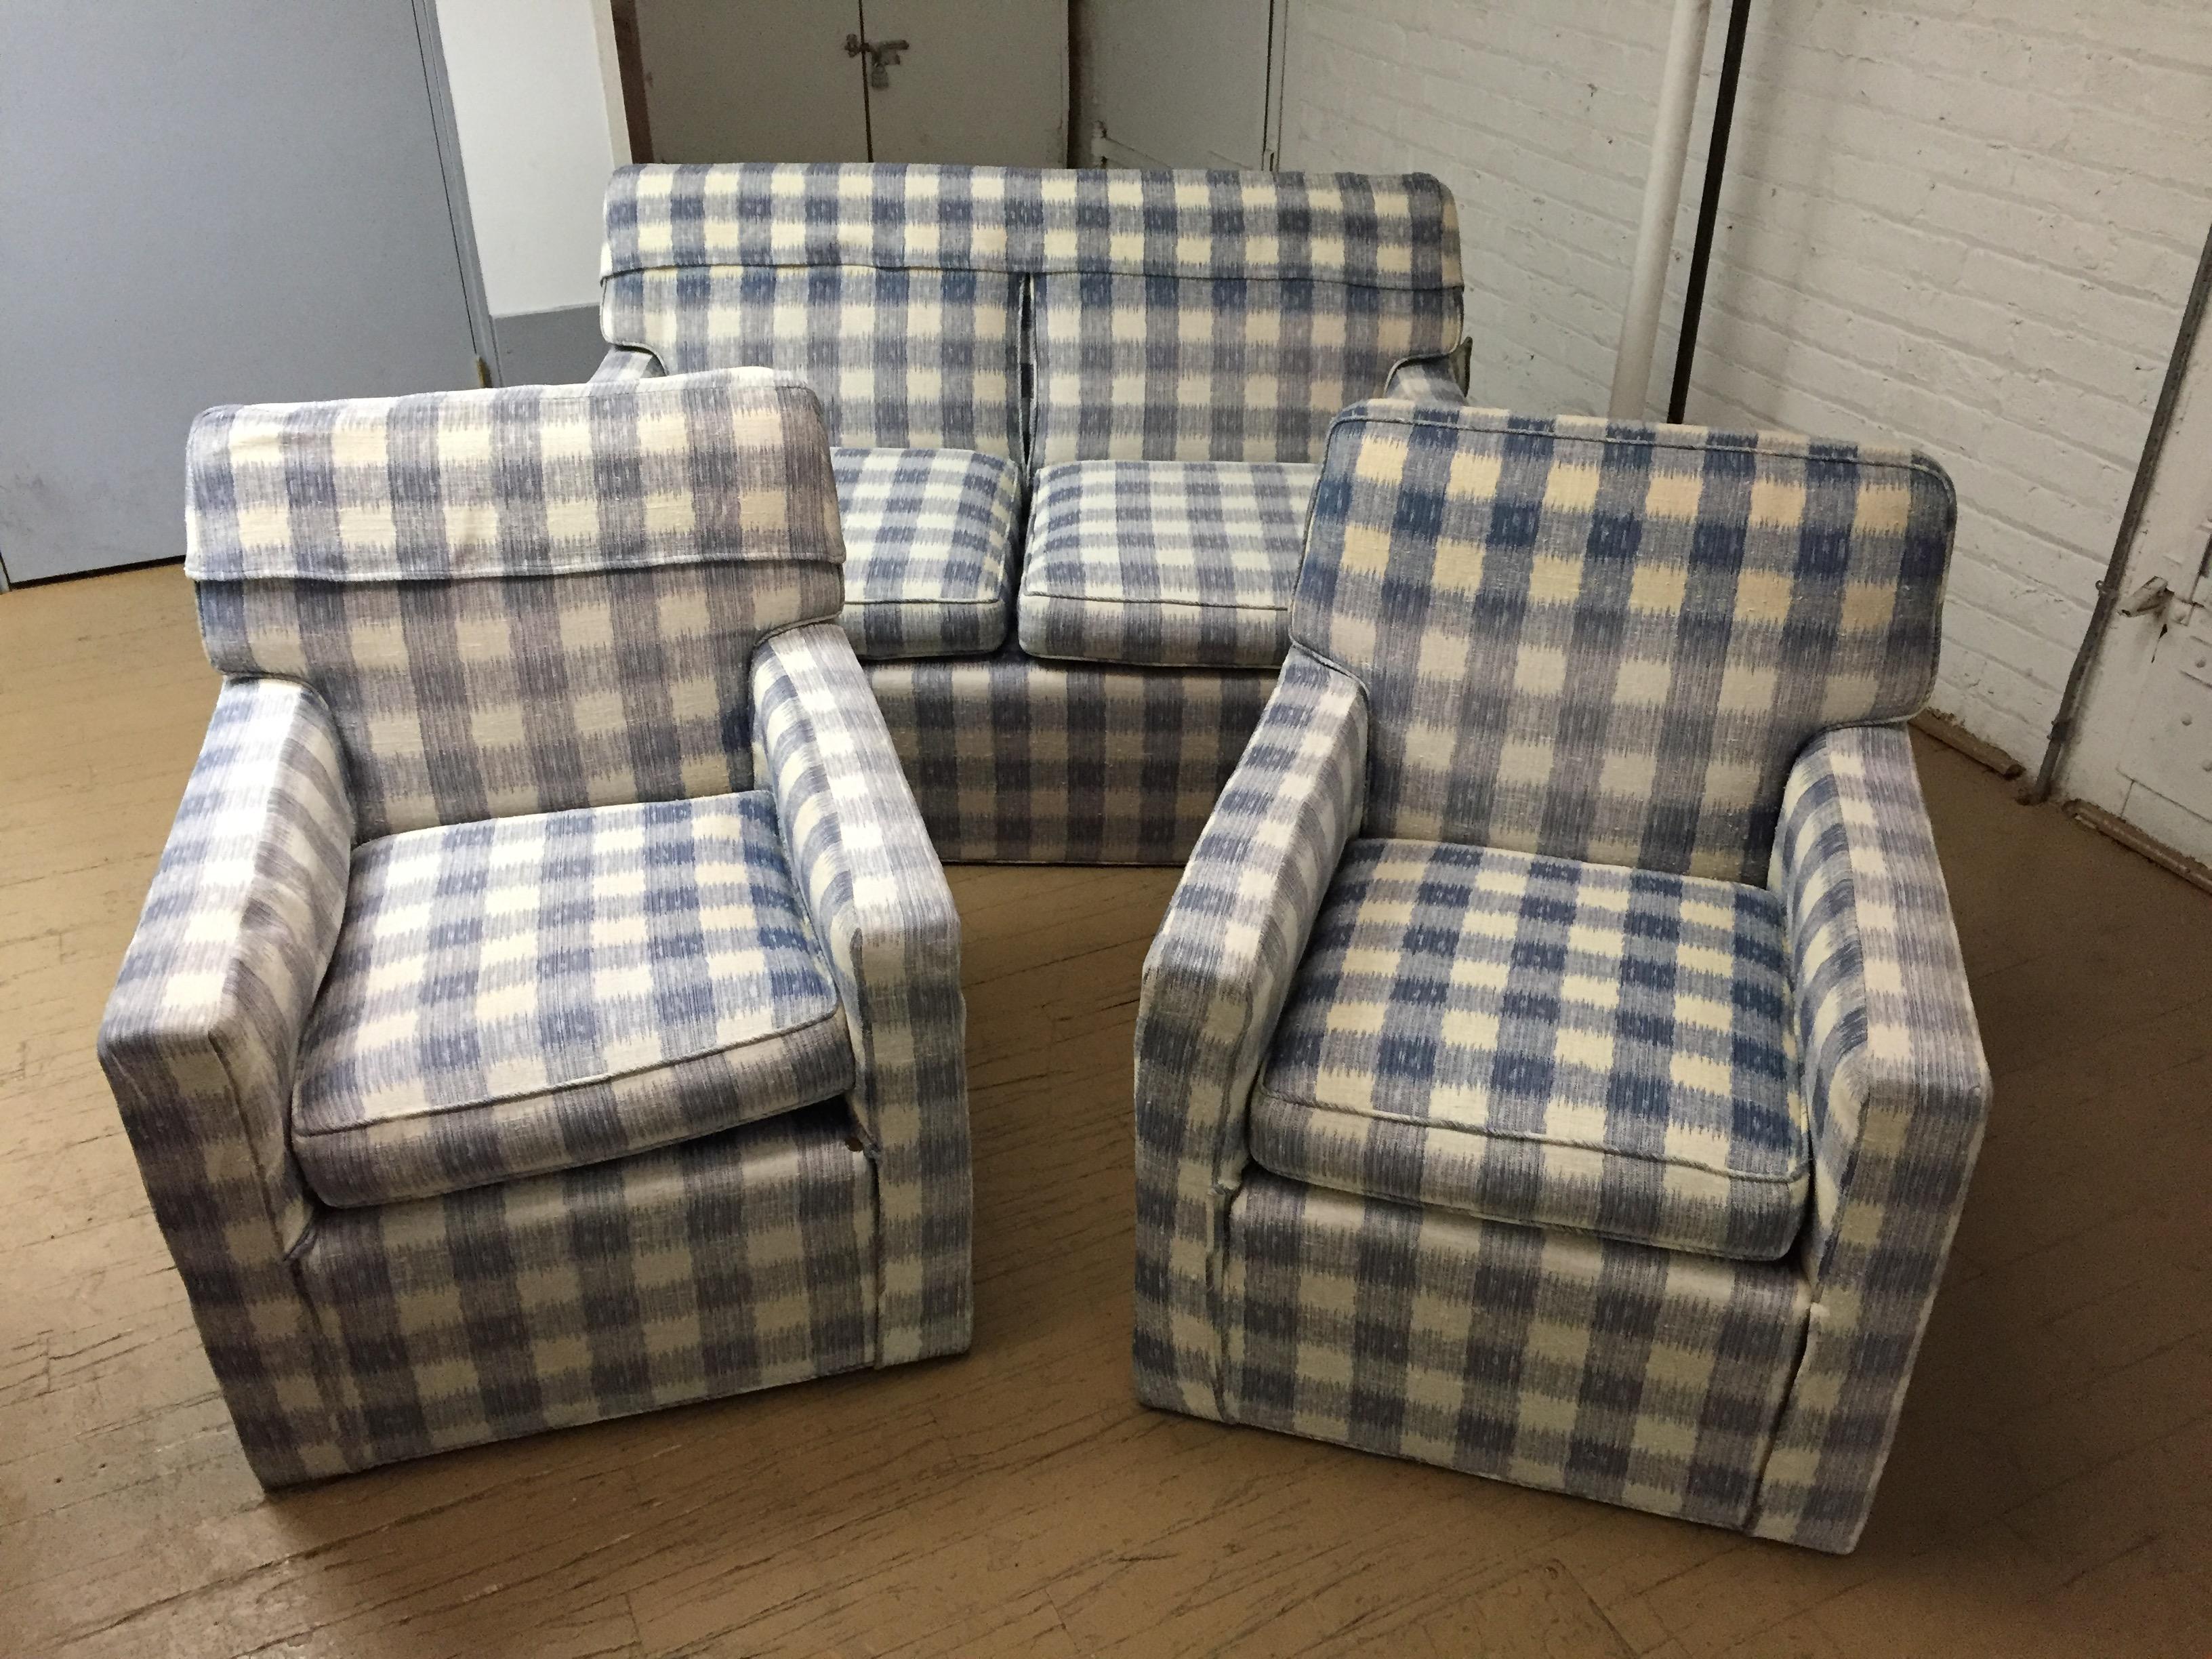 Mid-Century Brunschwig & Fils Upholstered Kravet Furniture Armchairs
 and matching love seat sold elsewhere in my shop.
These fine armchairs are constructed of the finest Kravet frame, and upholstered in soft blue and cream brunschwig & fils checked